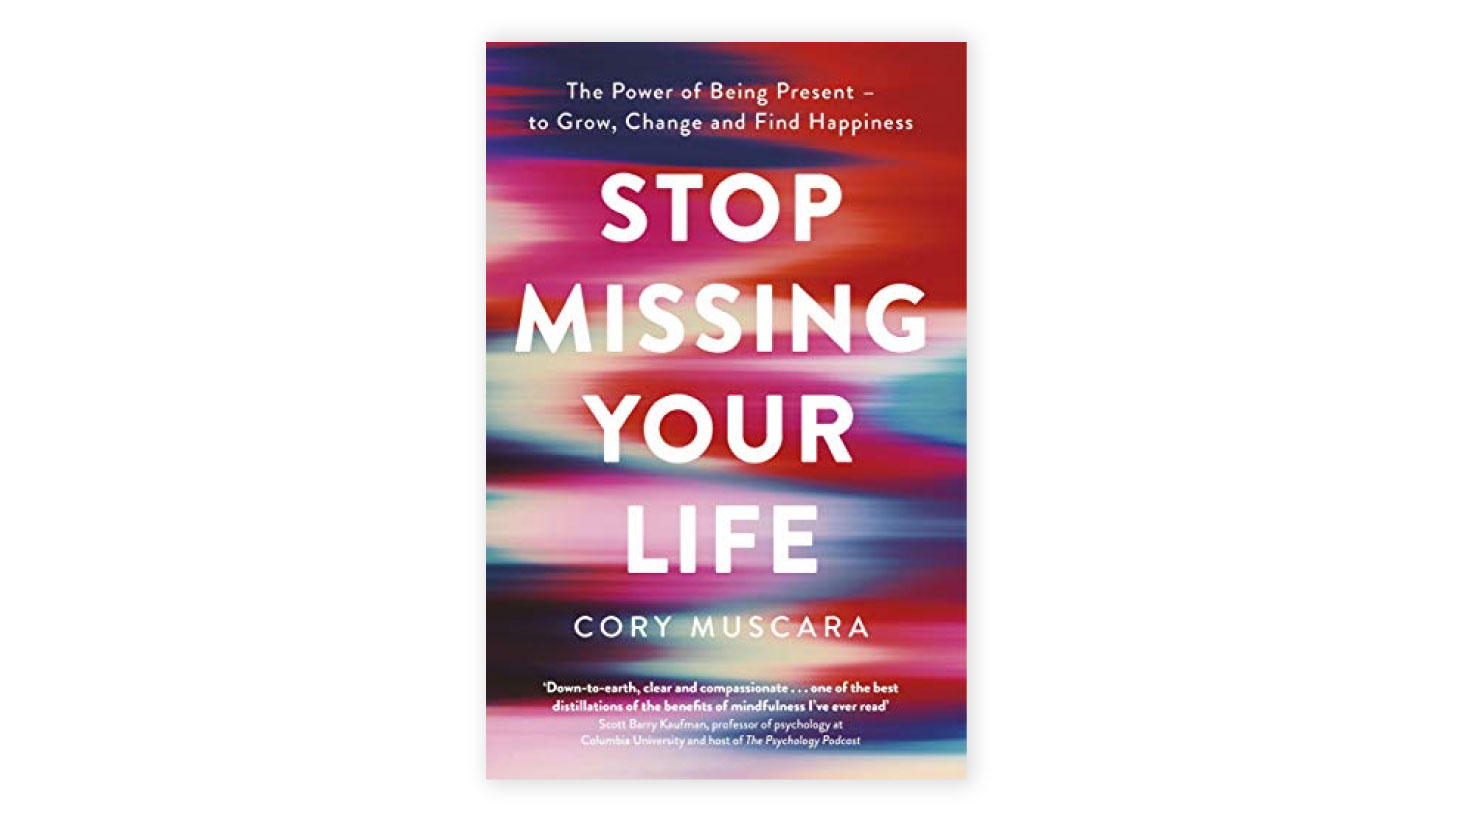 Book-5-Stop-Missing-Your-Life--how-to-be-deeply-present-in-an-un-present-world,-by-Cory-Muscara-